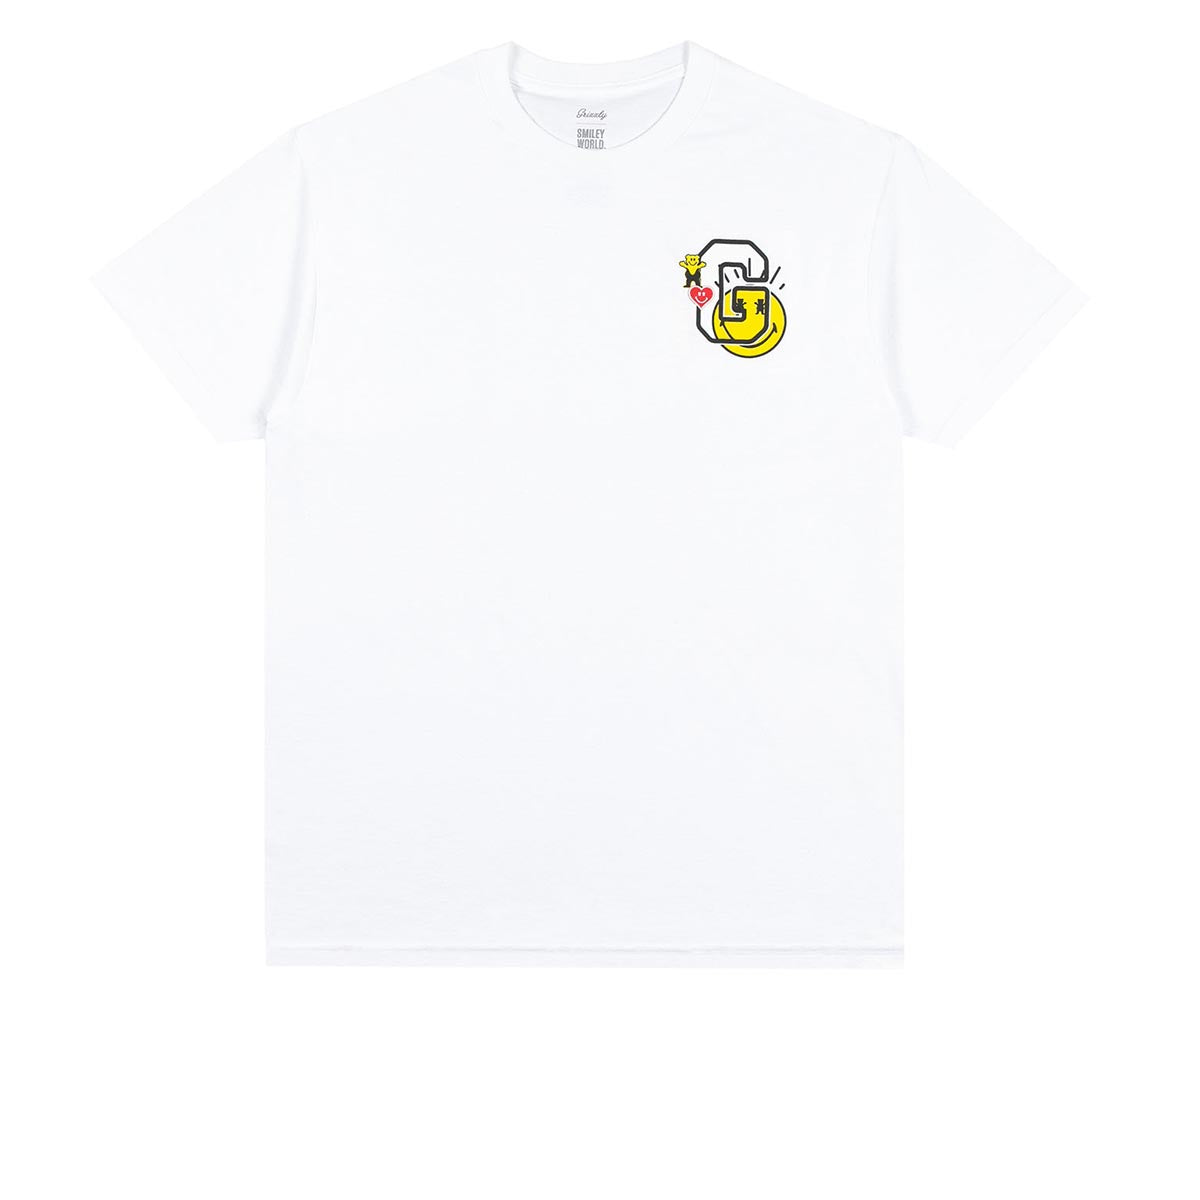 Grizzly x Smiley World T-Shirt - White image 1